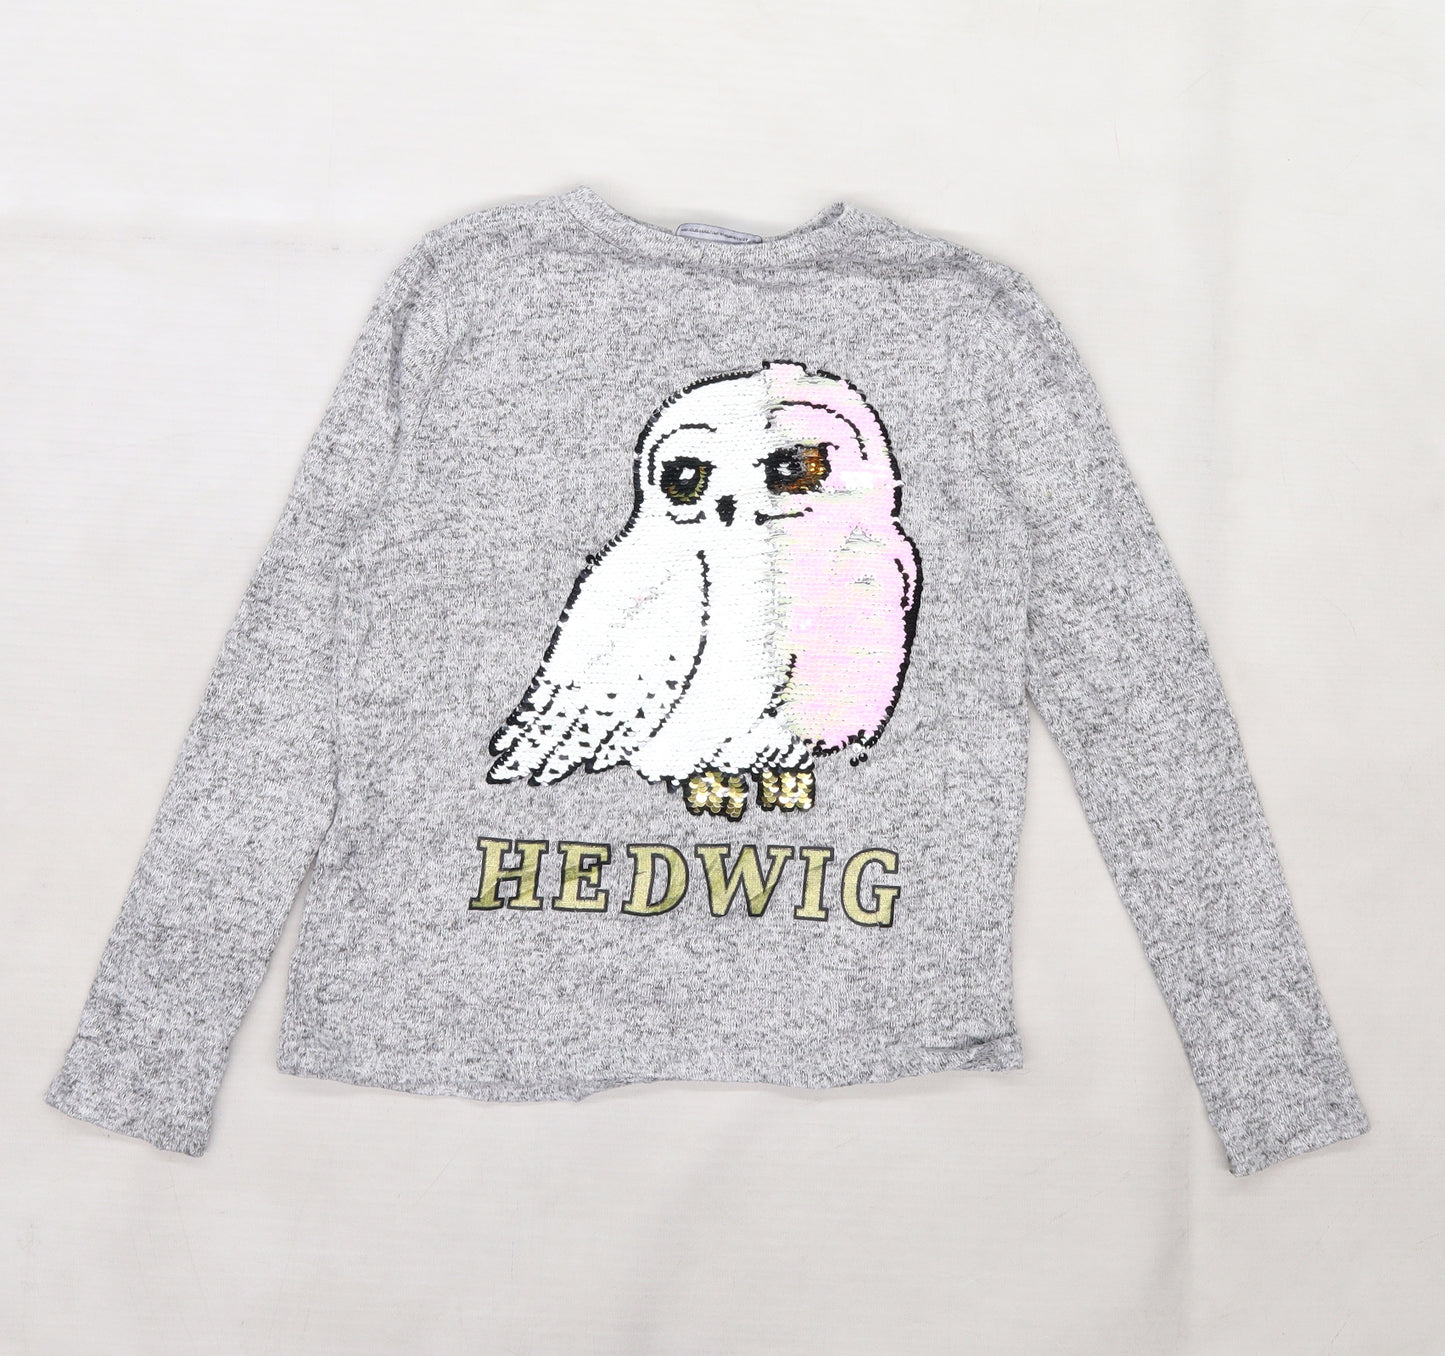 Harry Potter Girls Grey  Knit Pullover Jumper Size 9-10 Years  - hedwig owl